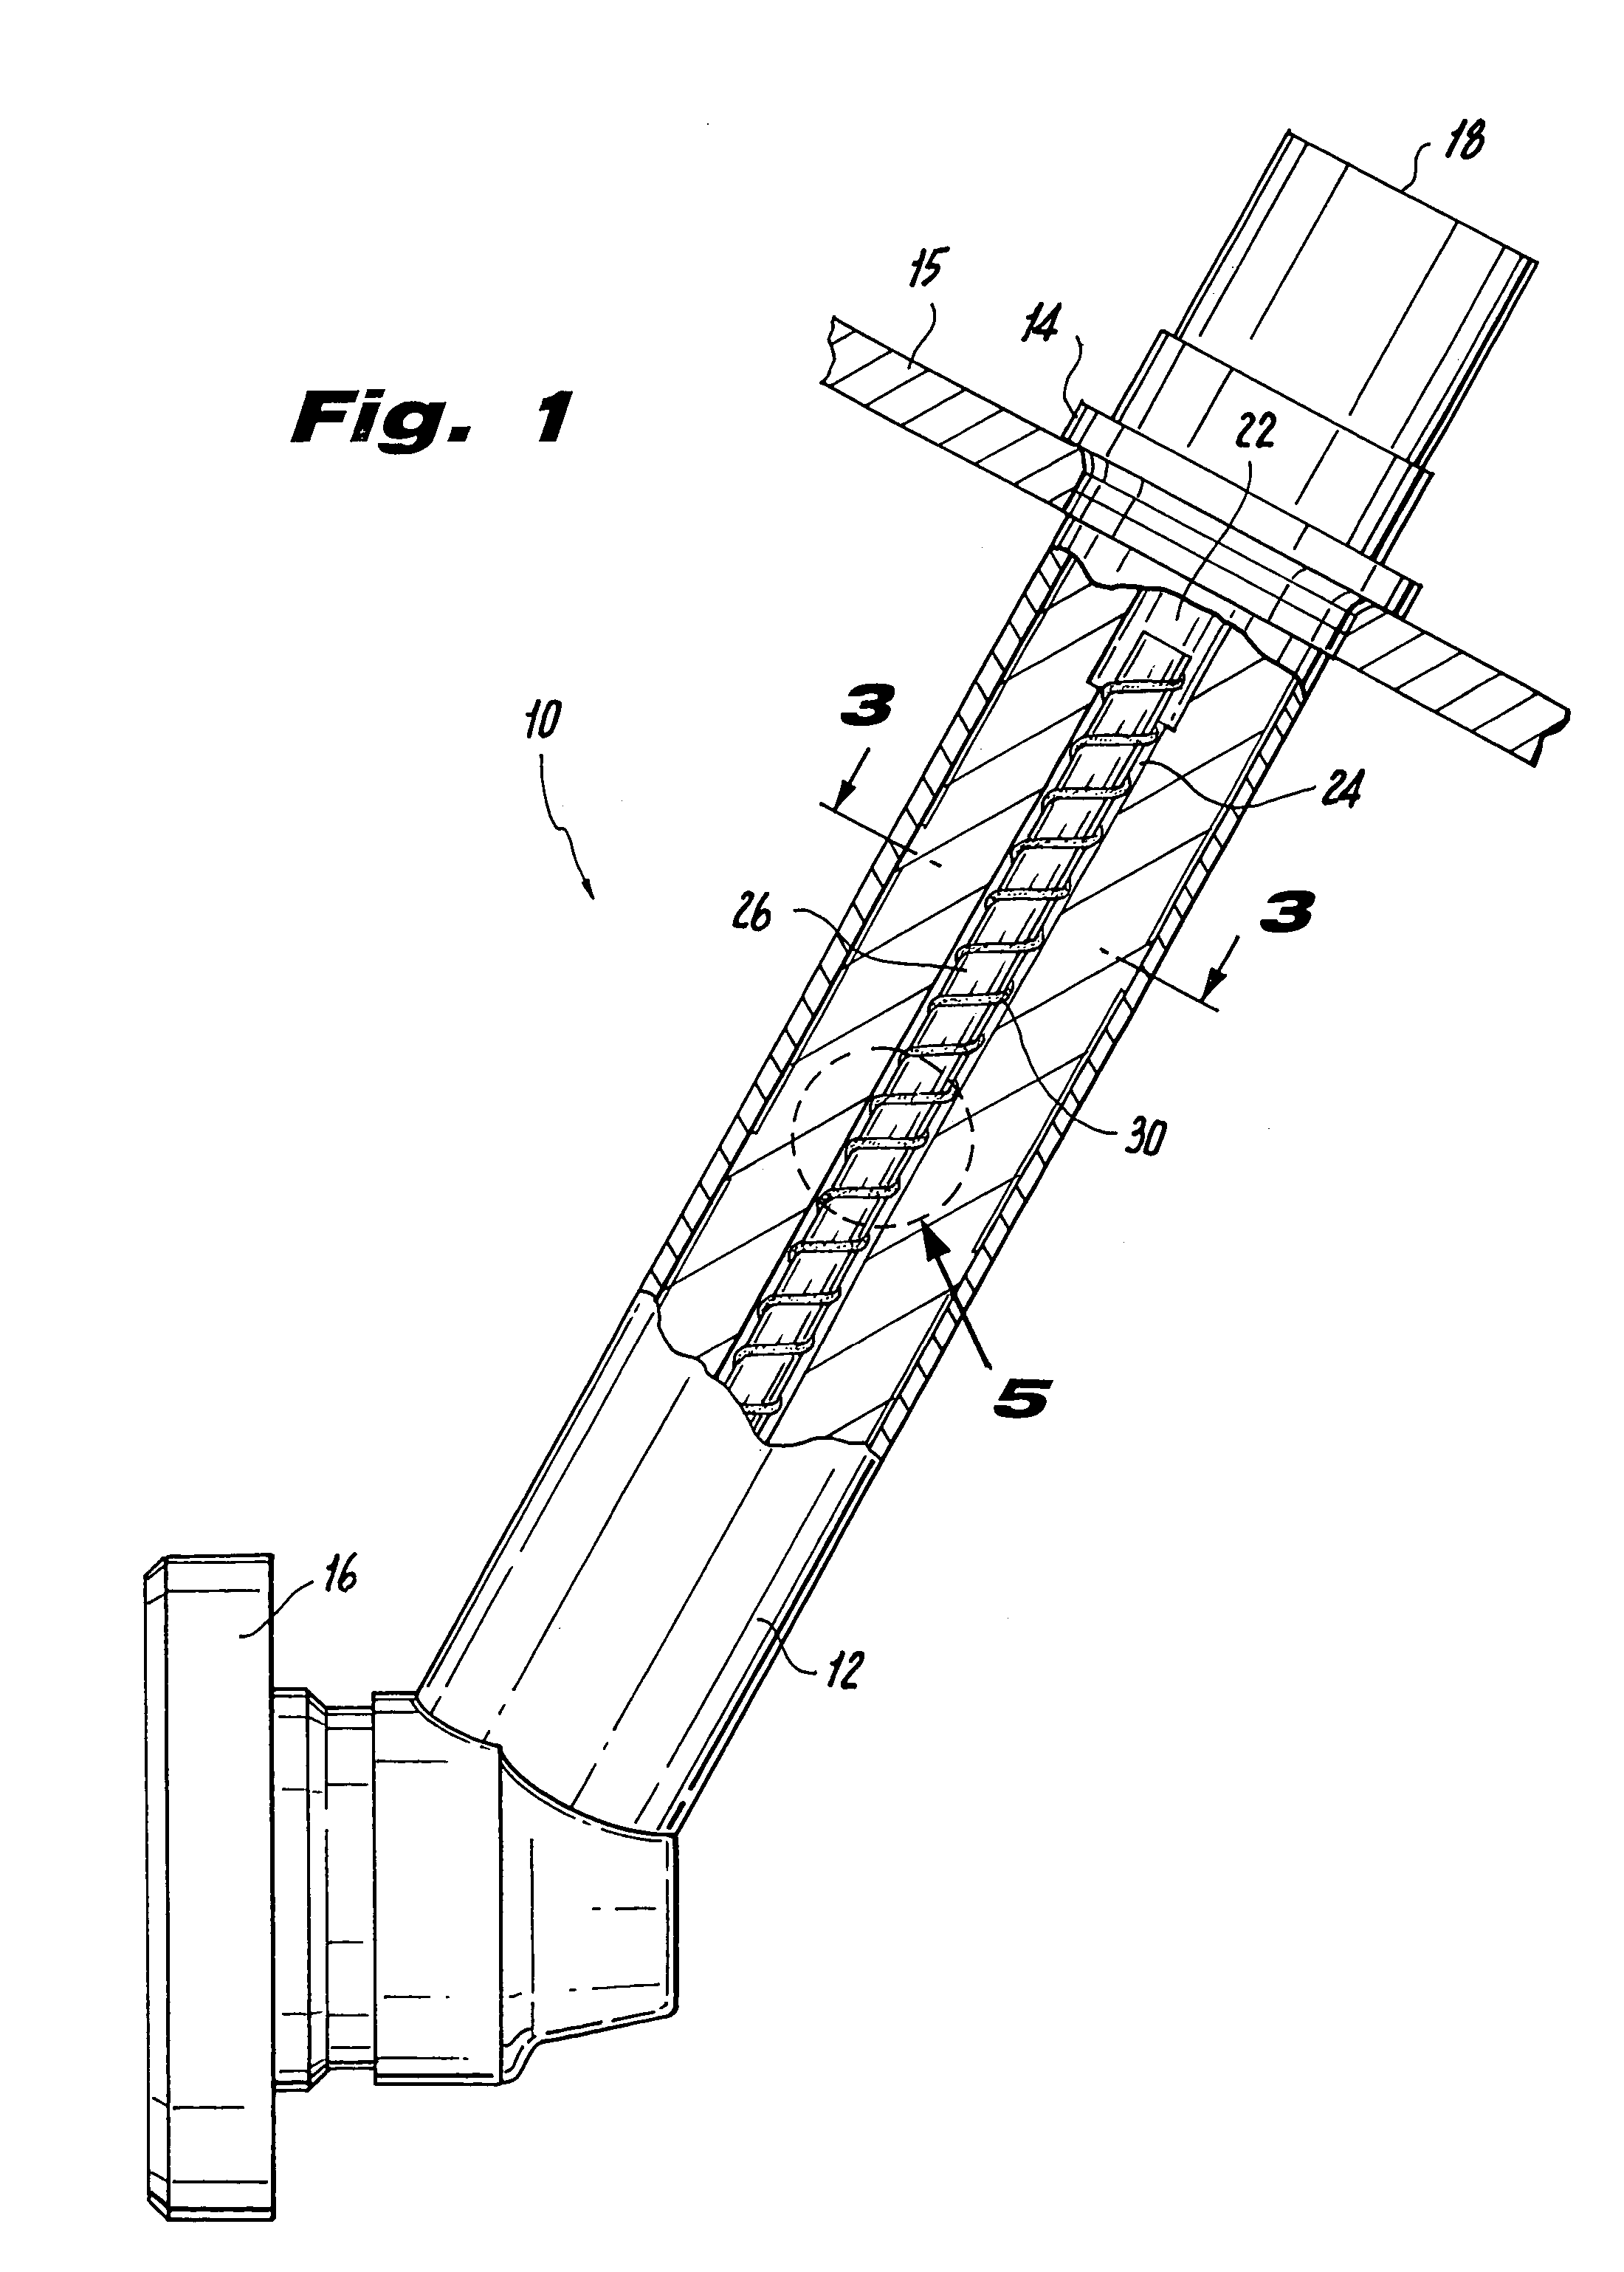 Method of forming a fuel feed passage in the feed arm of a fuel injector